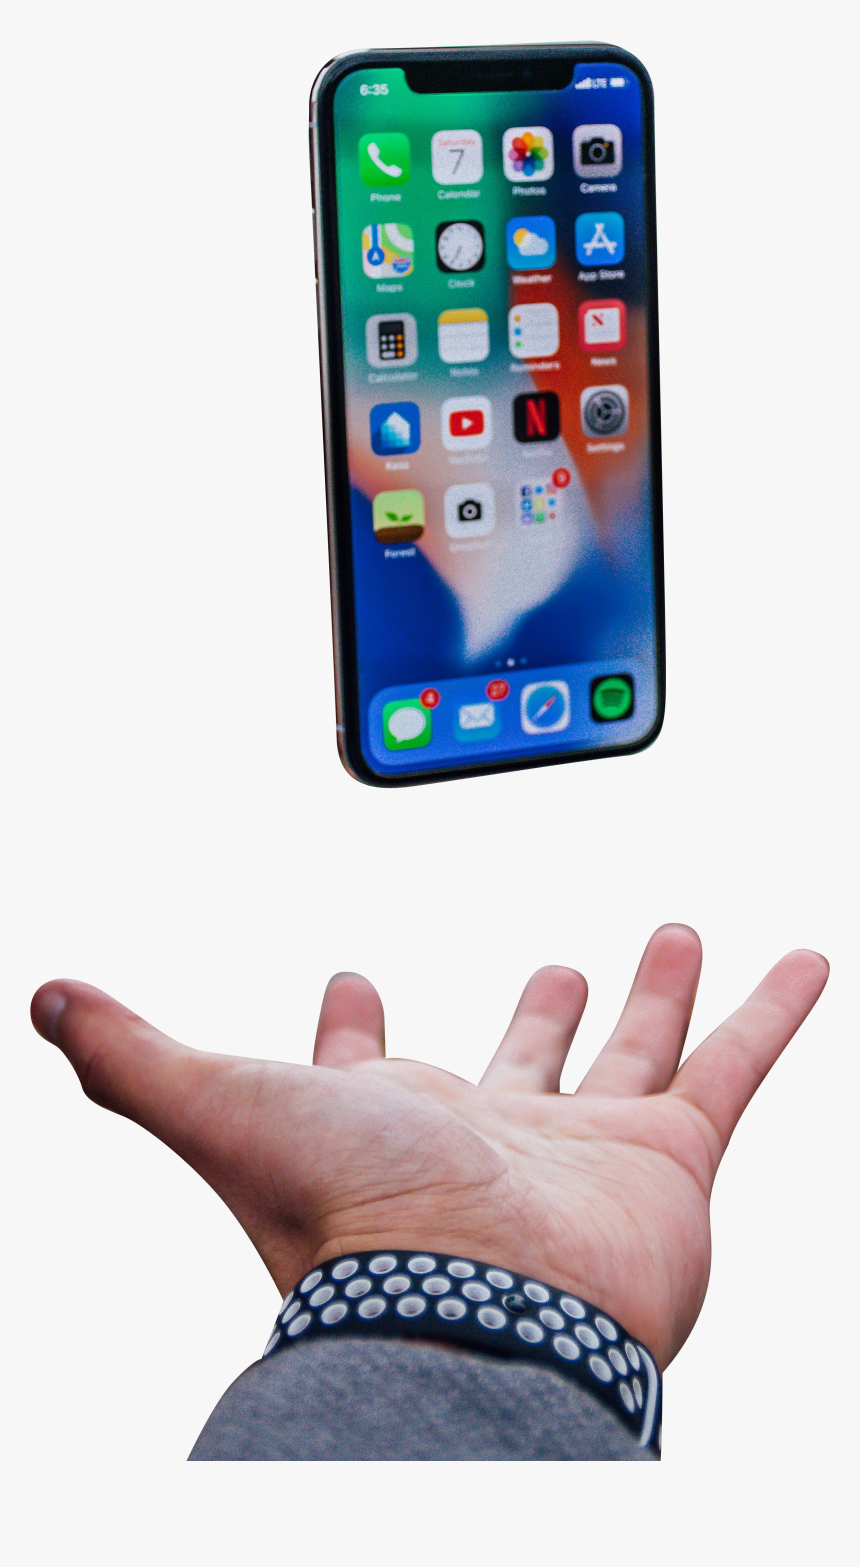 Iphone X Floating Over Palm - Iphone X In Hand, HD Png Download, Free Download